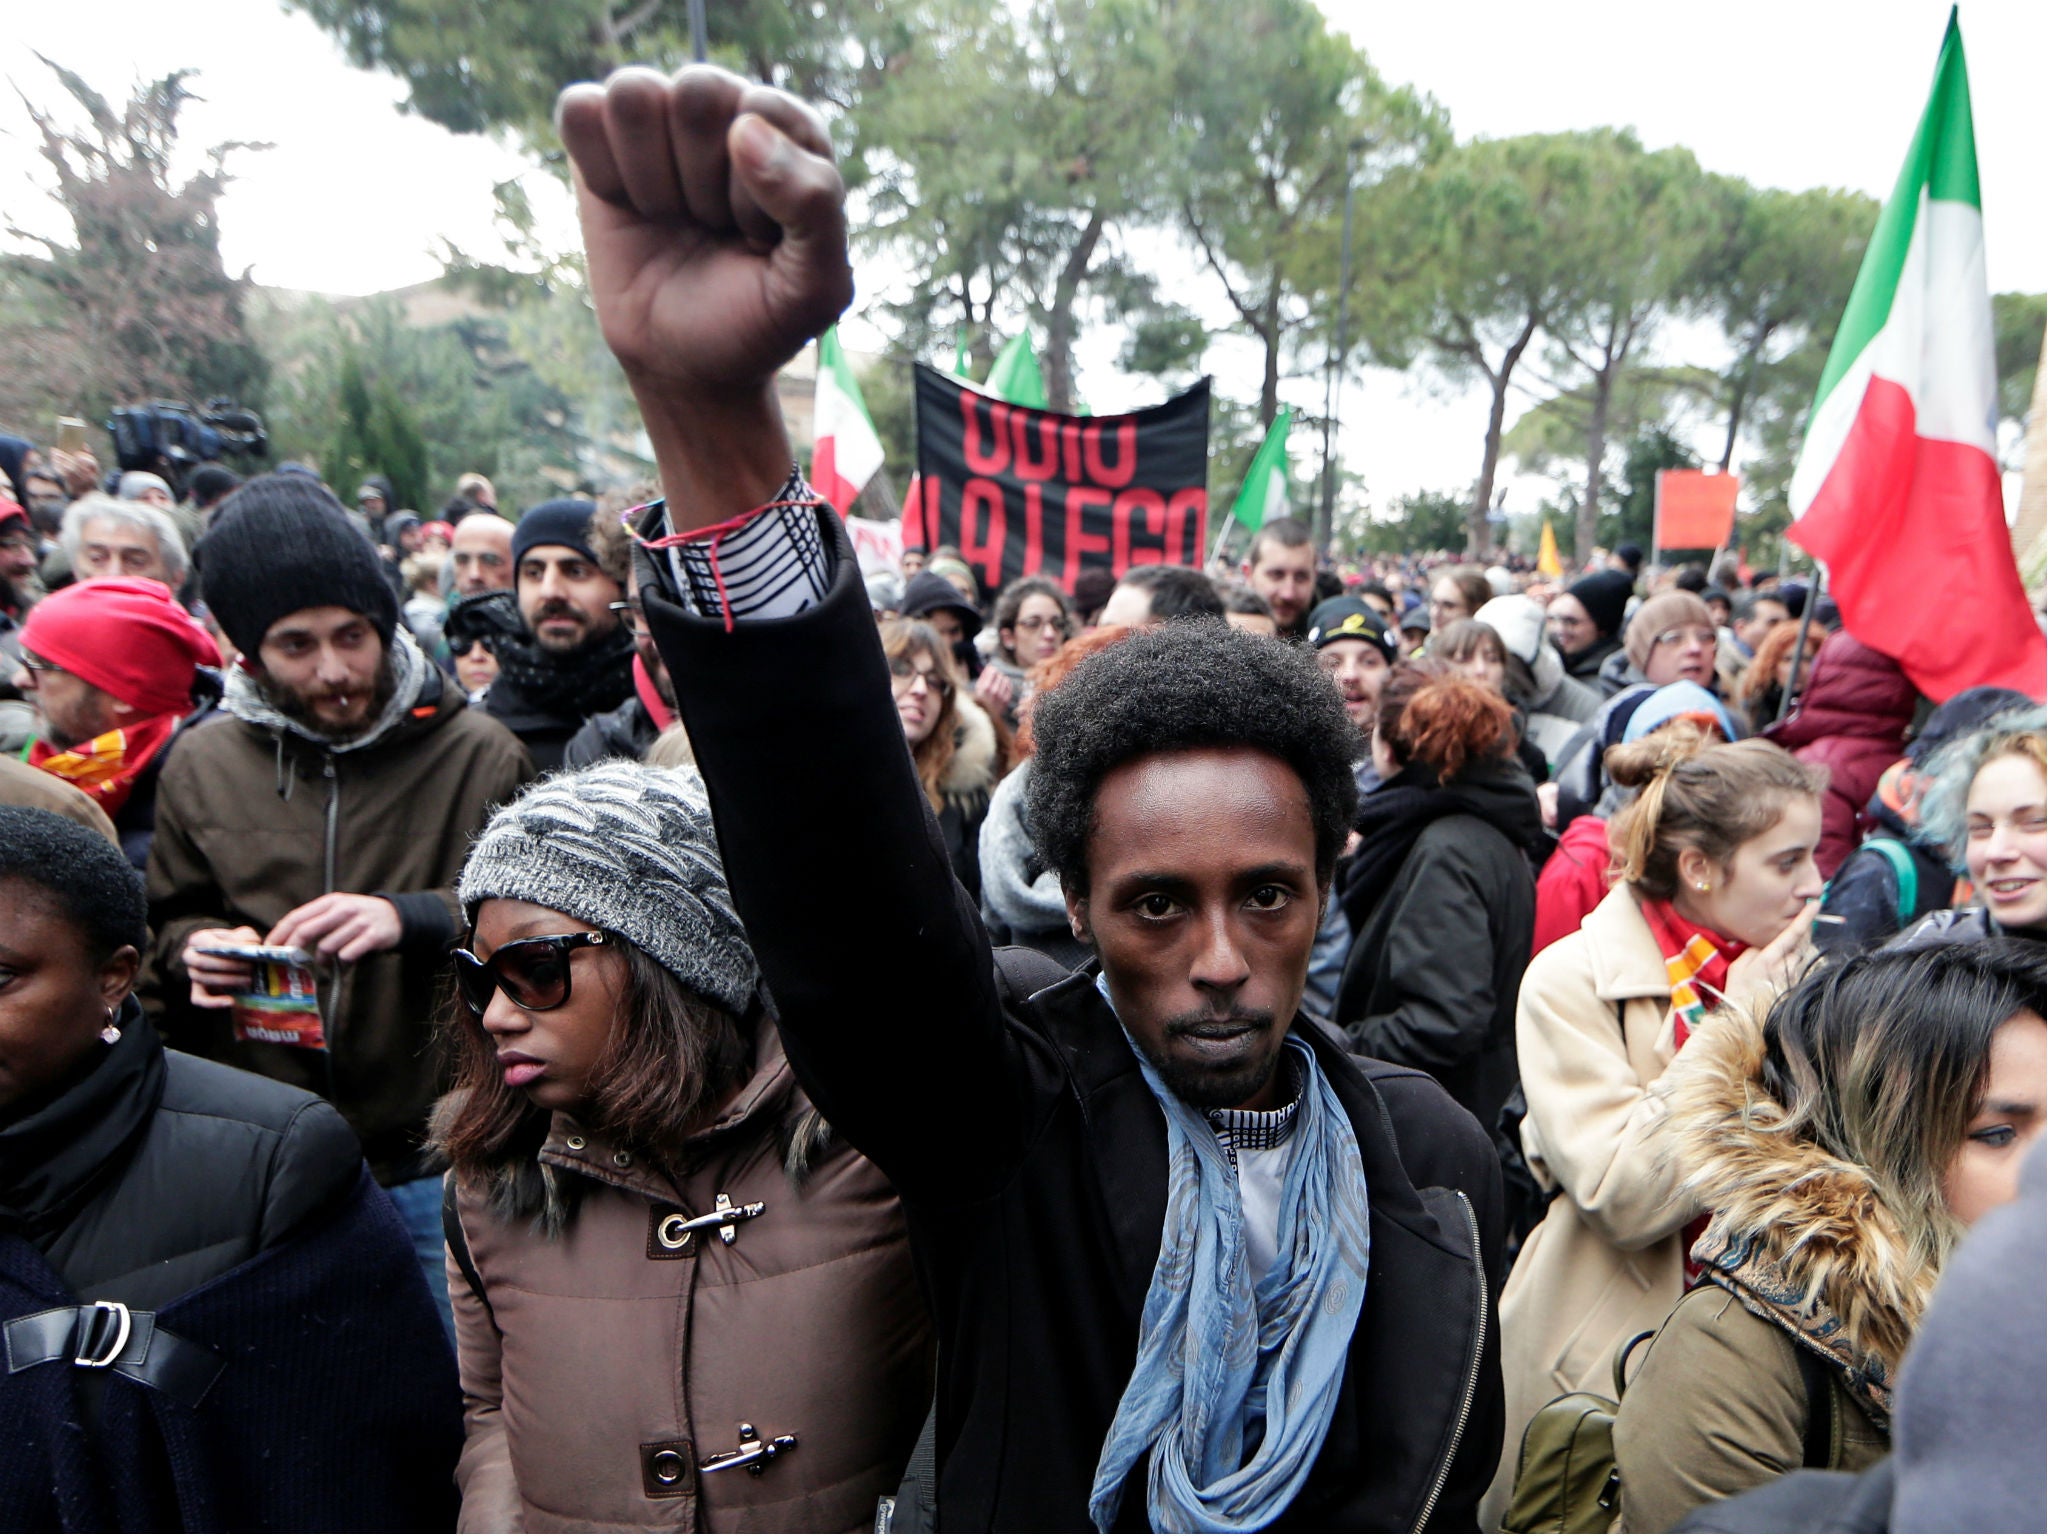 Demonstrators march during an anti-racism rally in Macerata earlier this month